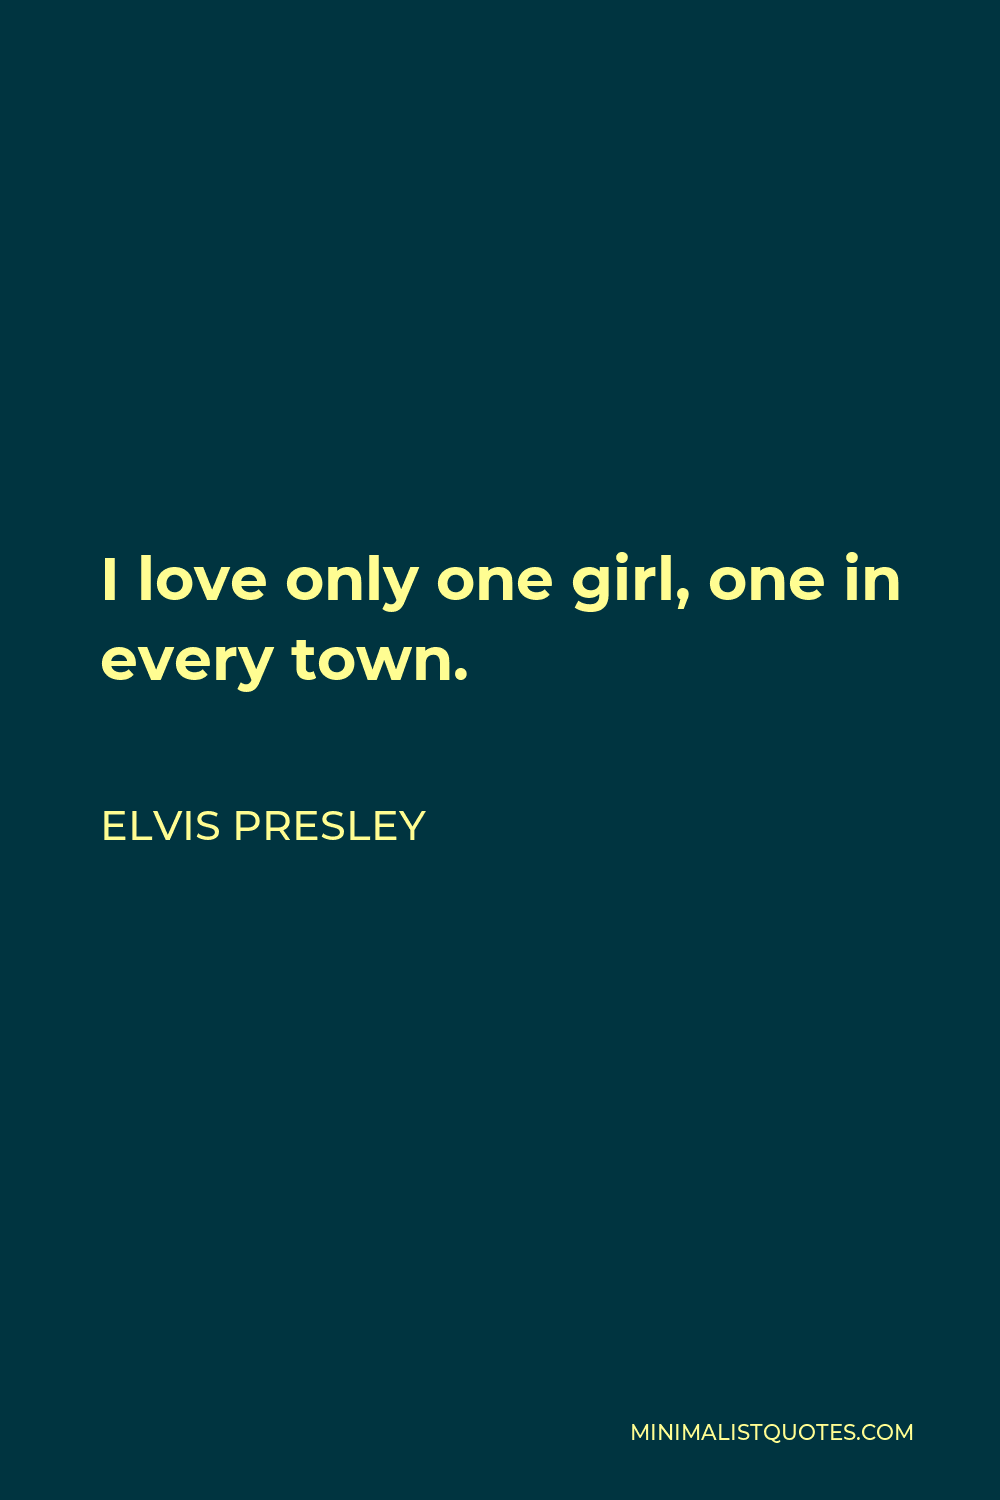 Elvis Presley Quote - I love only one girl, one in every town.